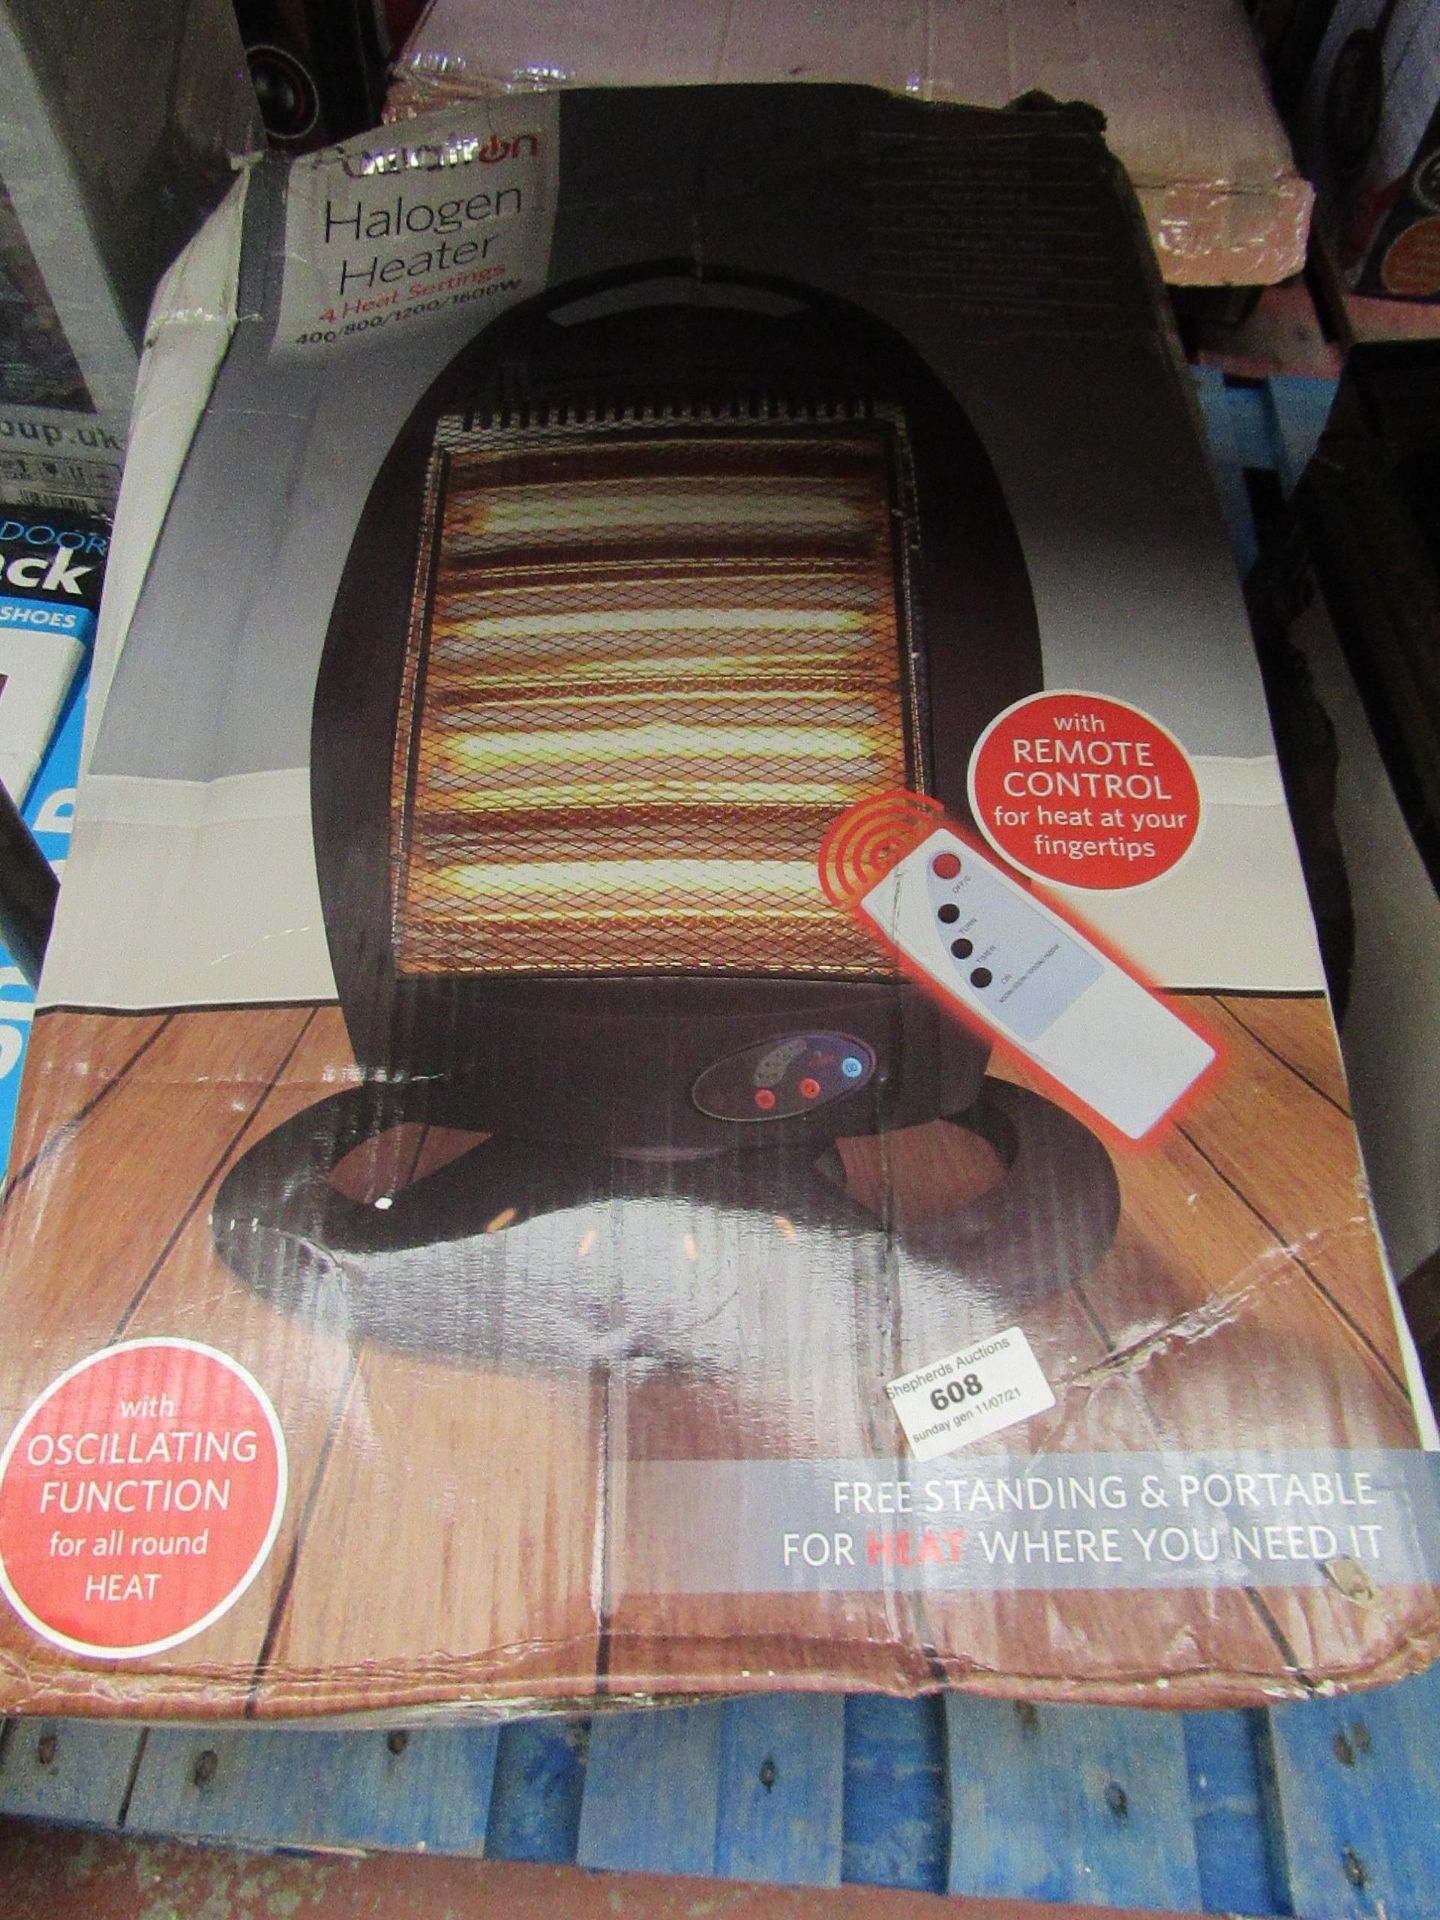 2x powatron halogen heater with 4 heat settings, 400/800/1200/1600w, unchecked & boxed.